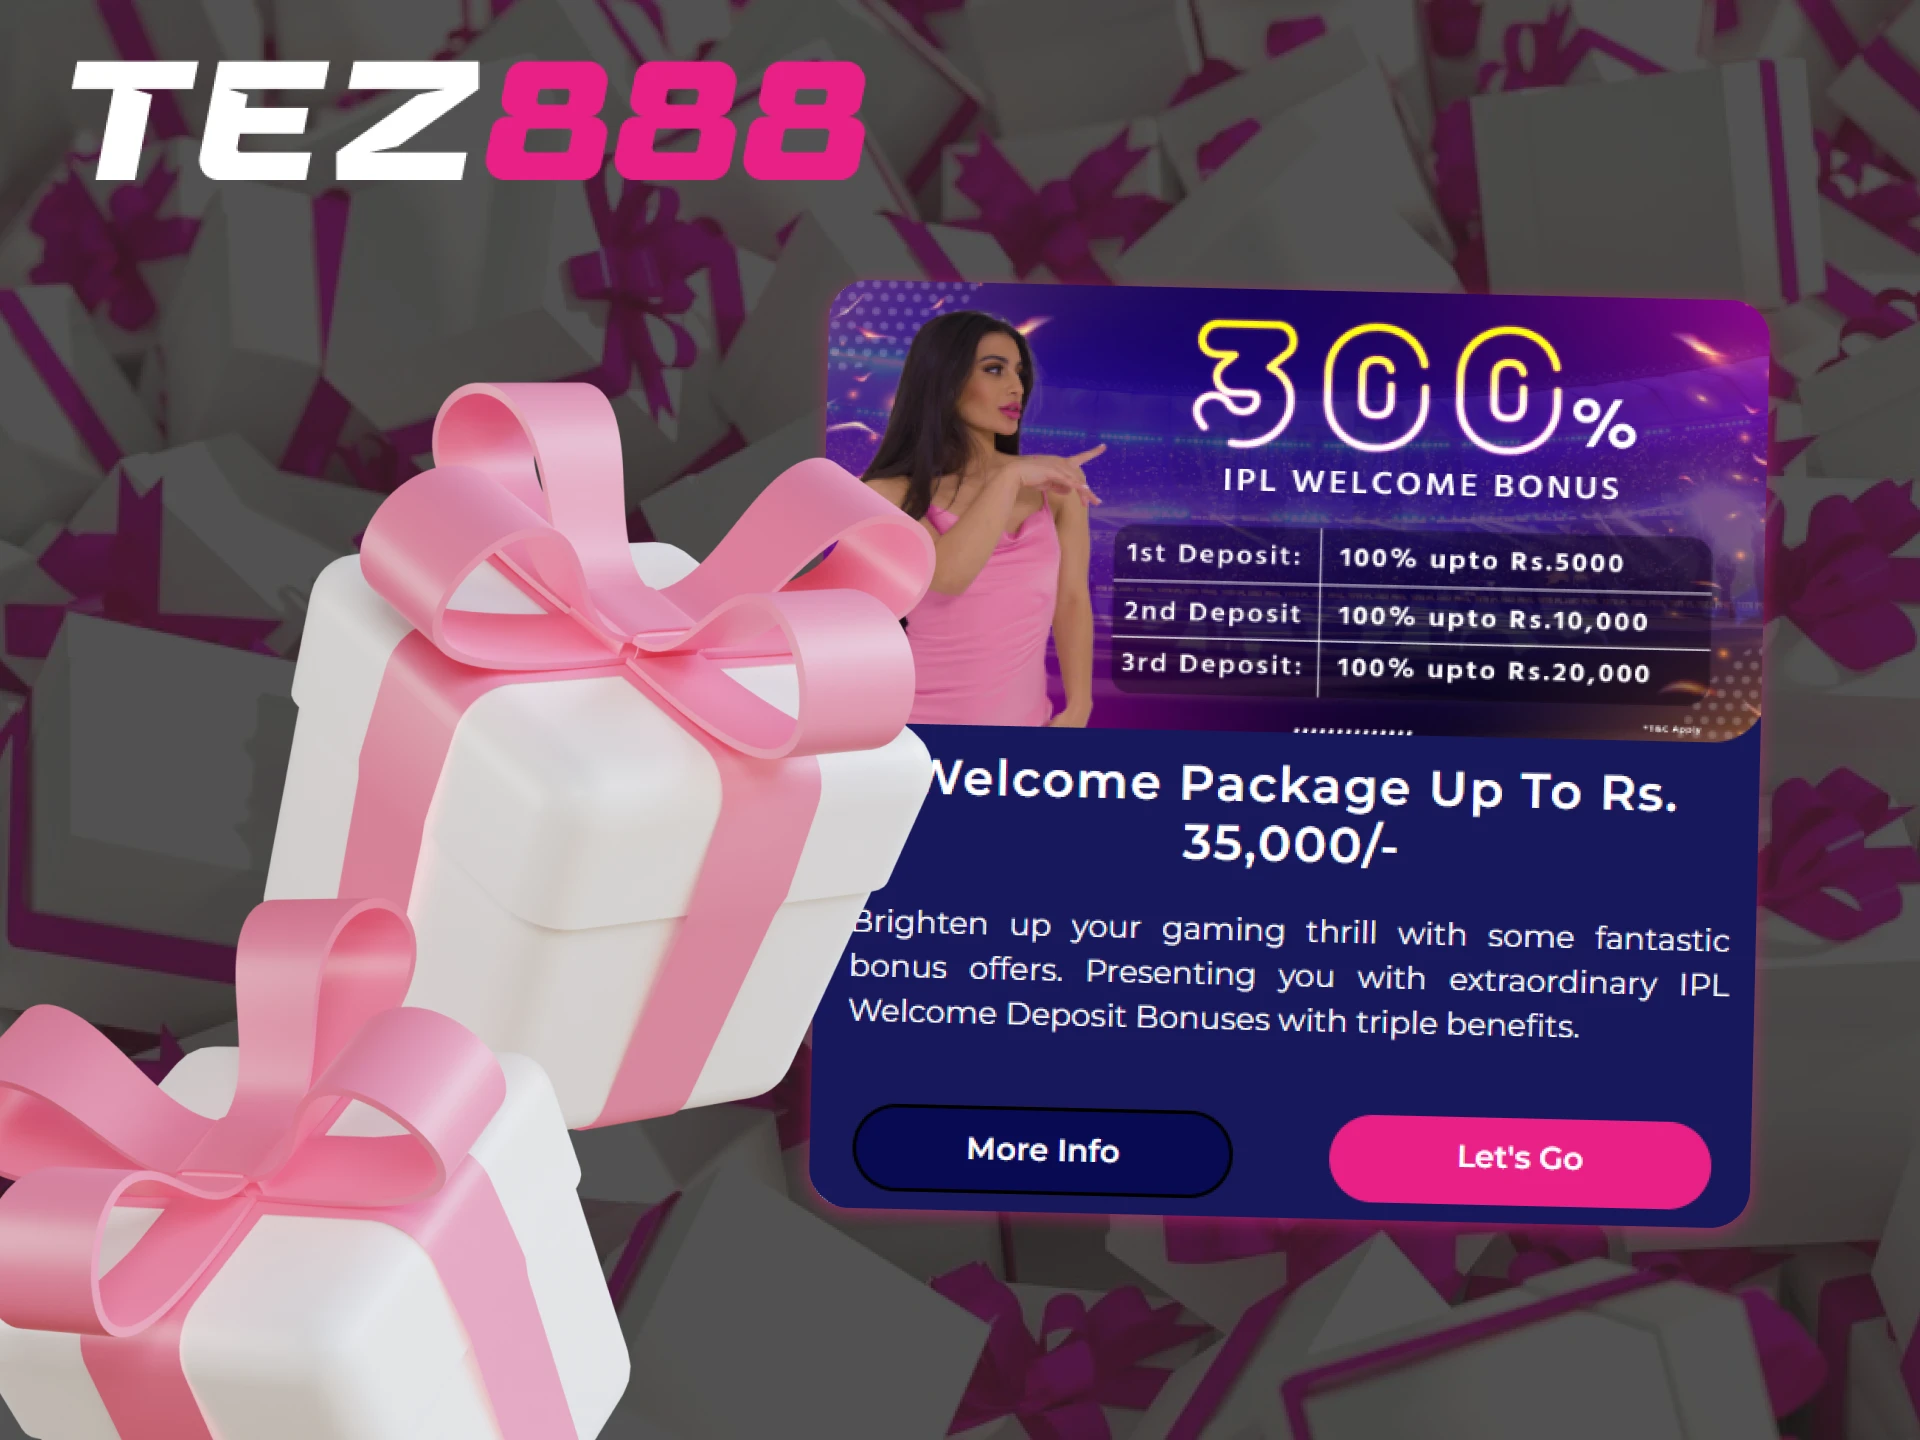 You can count on a lucrative welcome bonus after registering at Tez888 Casino.